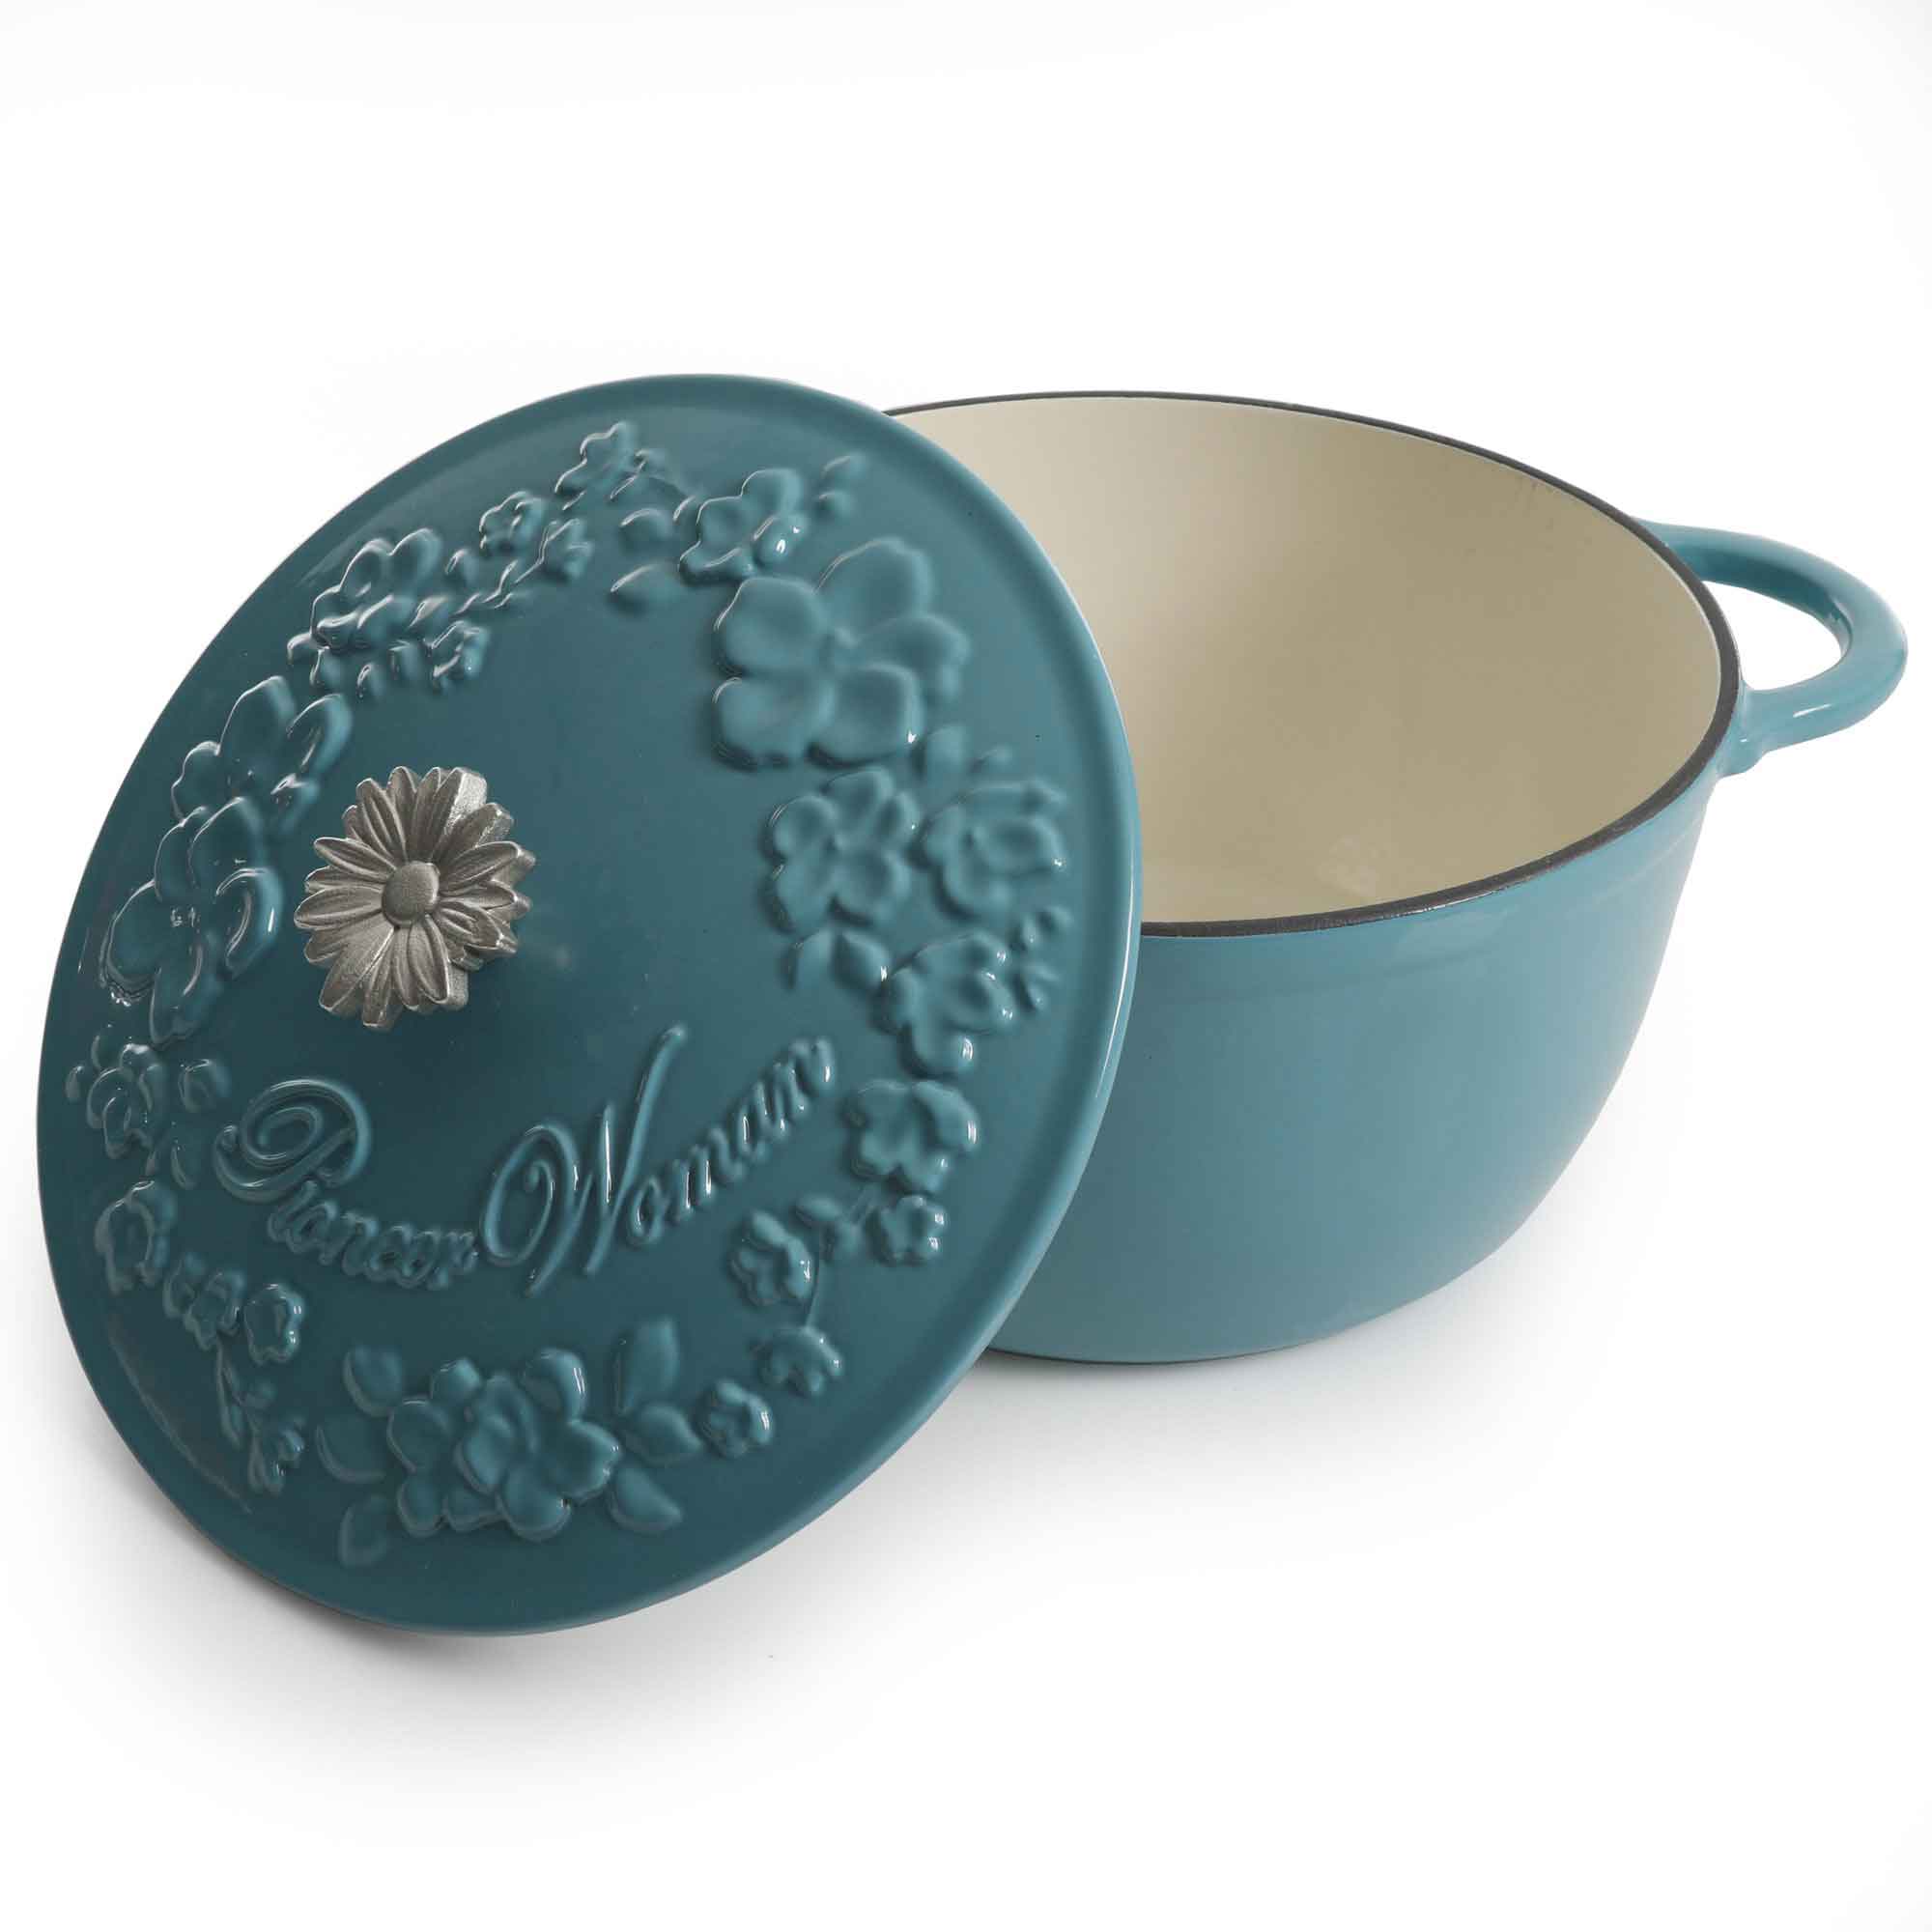 The Pioneer Woman Timeless Beauty 5-Quart Dutch Oven, Turquoise - Zars Buy